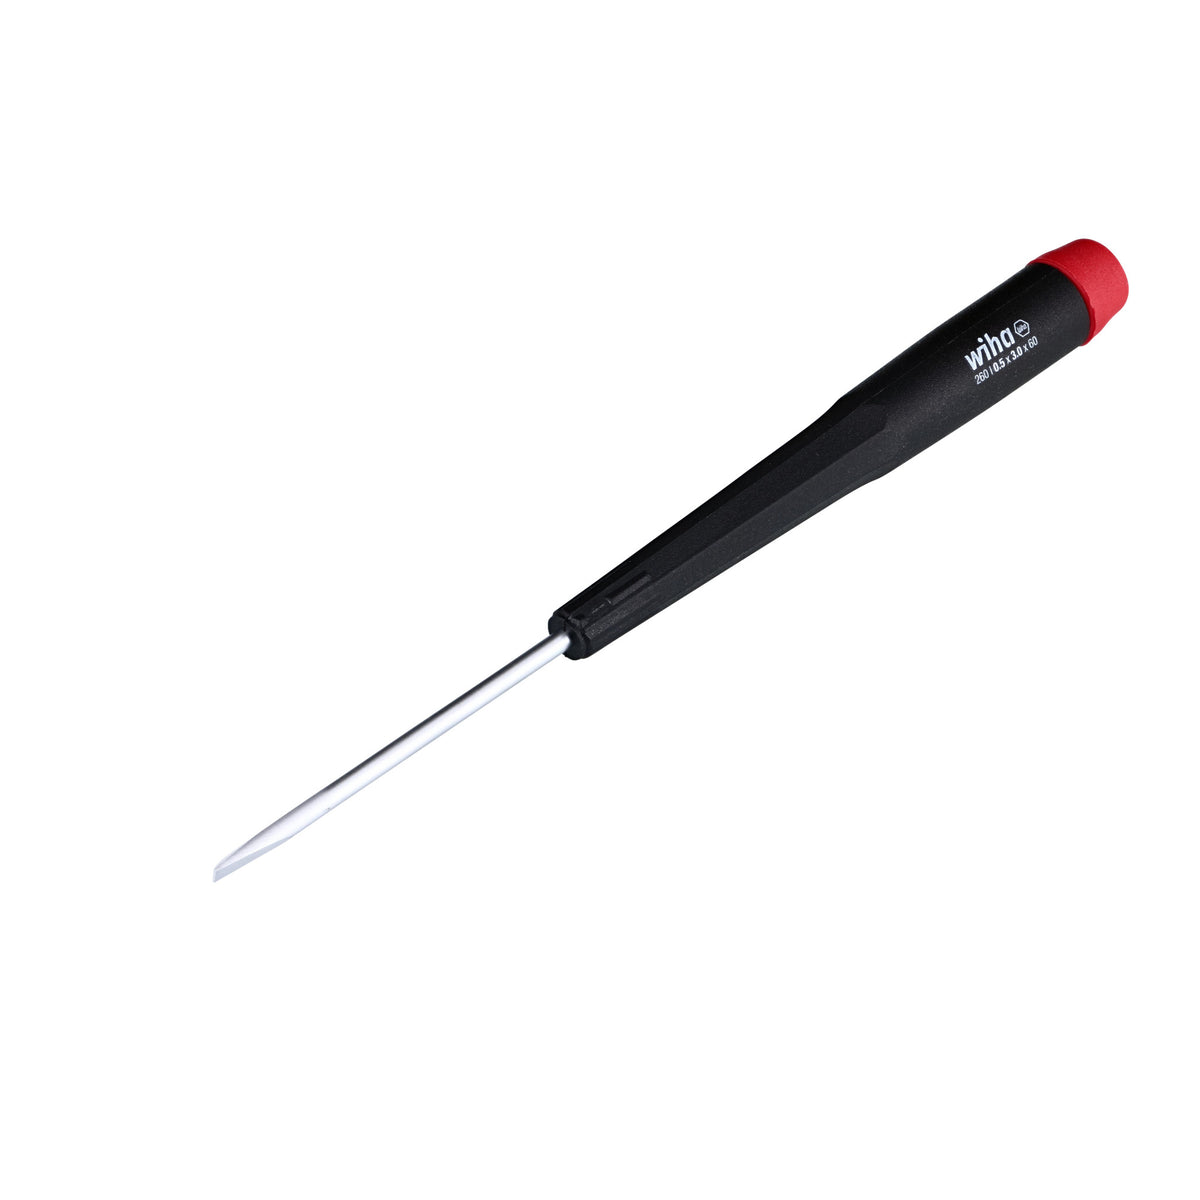 Precision Slotted Screwdrivers